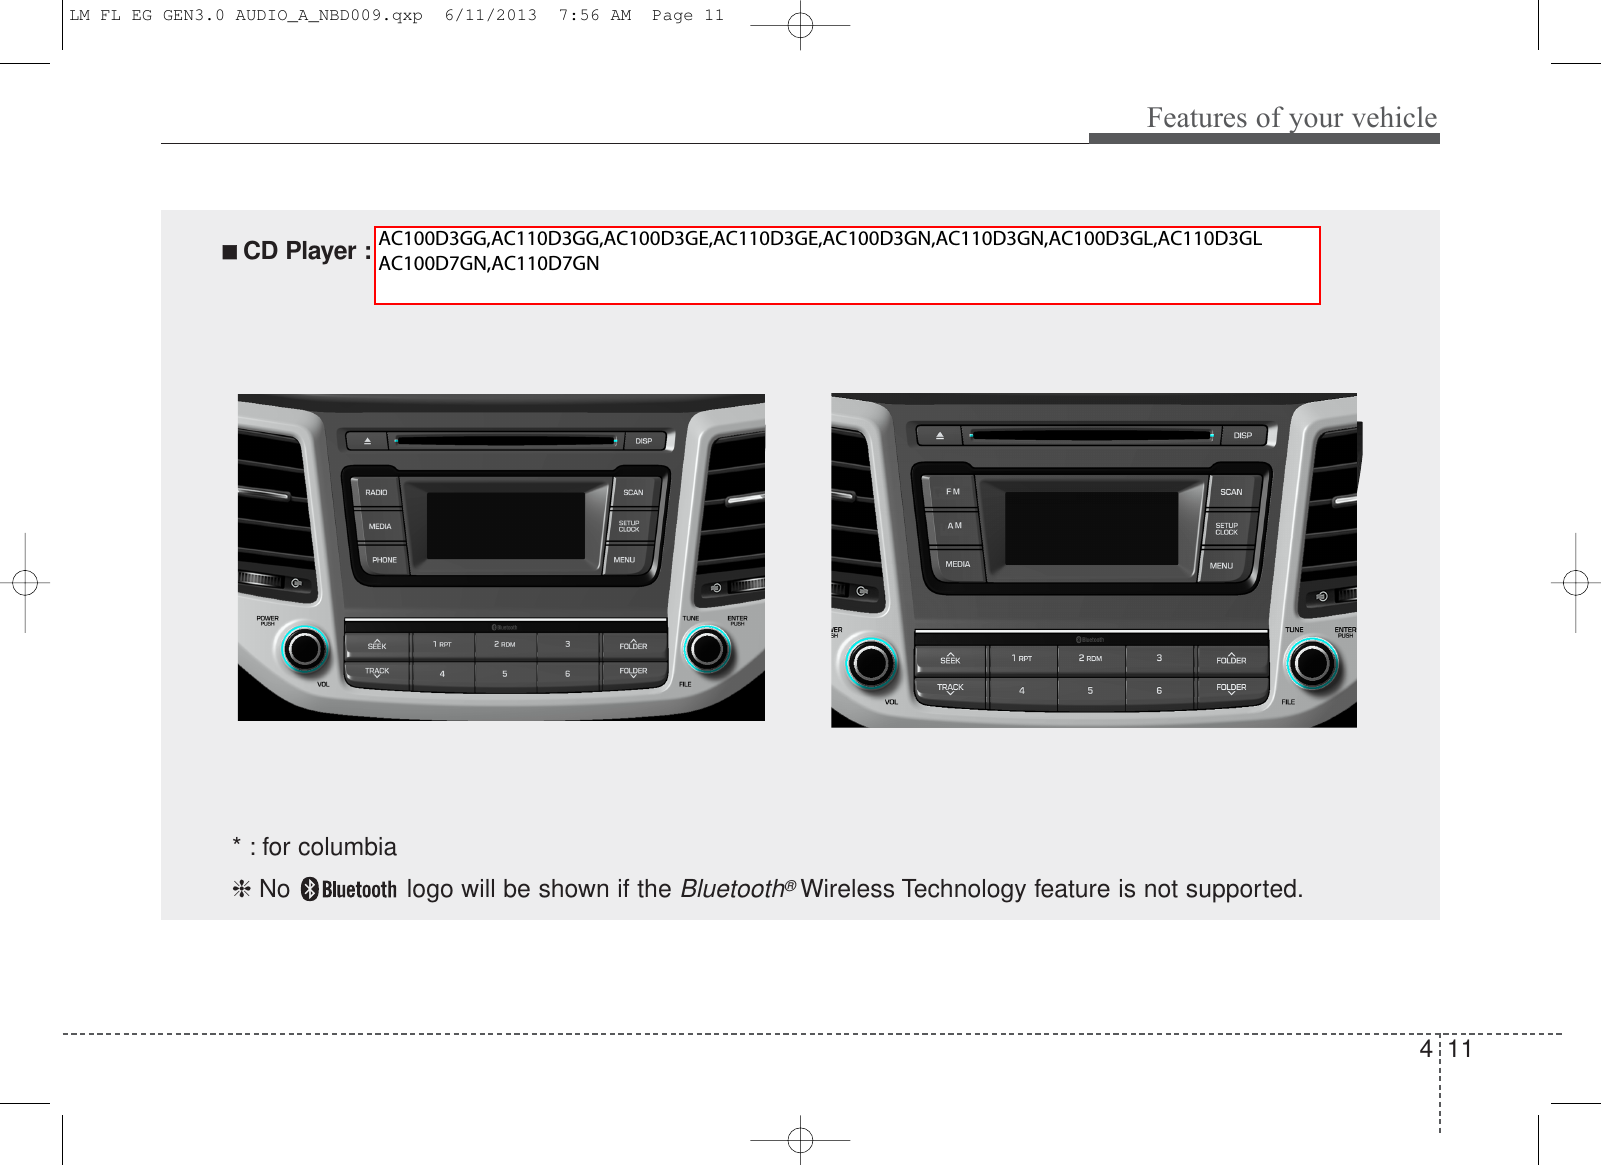 411Features of your vehicle* : for columbia❈ No  logo will be shown if the Bluetooth®Wireless Technology feature is not supported.■■  CD Player : AC100TMGG, AC110TMGG, AC100TMGE, AC110TMGE, AC100TMGN, AC110TMGN,AC100TMGL*, AC110TMGL*LM FL EG GEN3.0 AUDIO_A_NBD009.qxp  6/11/2013  7:56 AM  Page 11AC100D3GG,AC110D3GG,AC100D3GE,AC110D3GE,AC100D3GN,AC110D3GN,AC100D3GL,AC110D3GL AC100D7GN,AC110D7GN